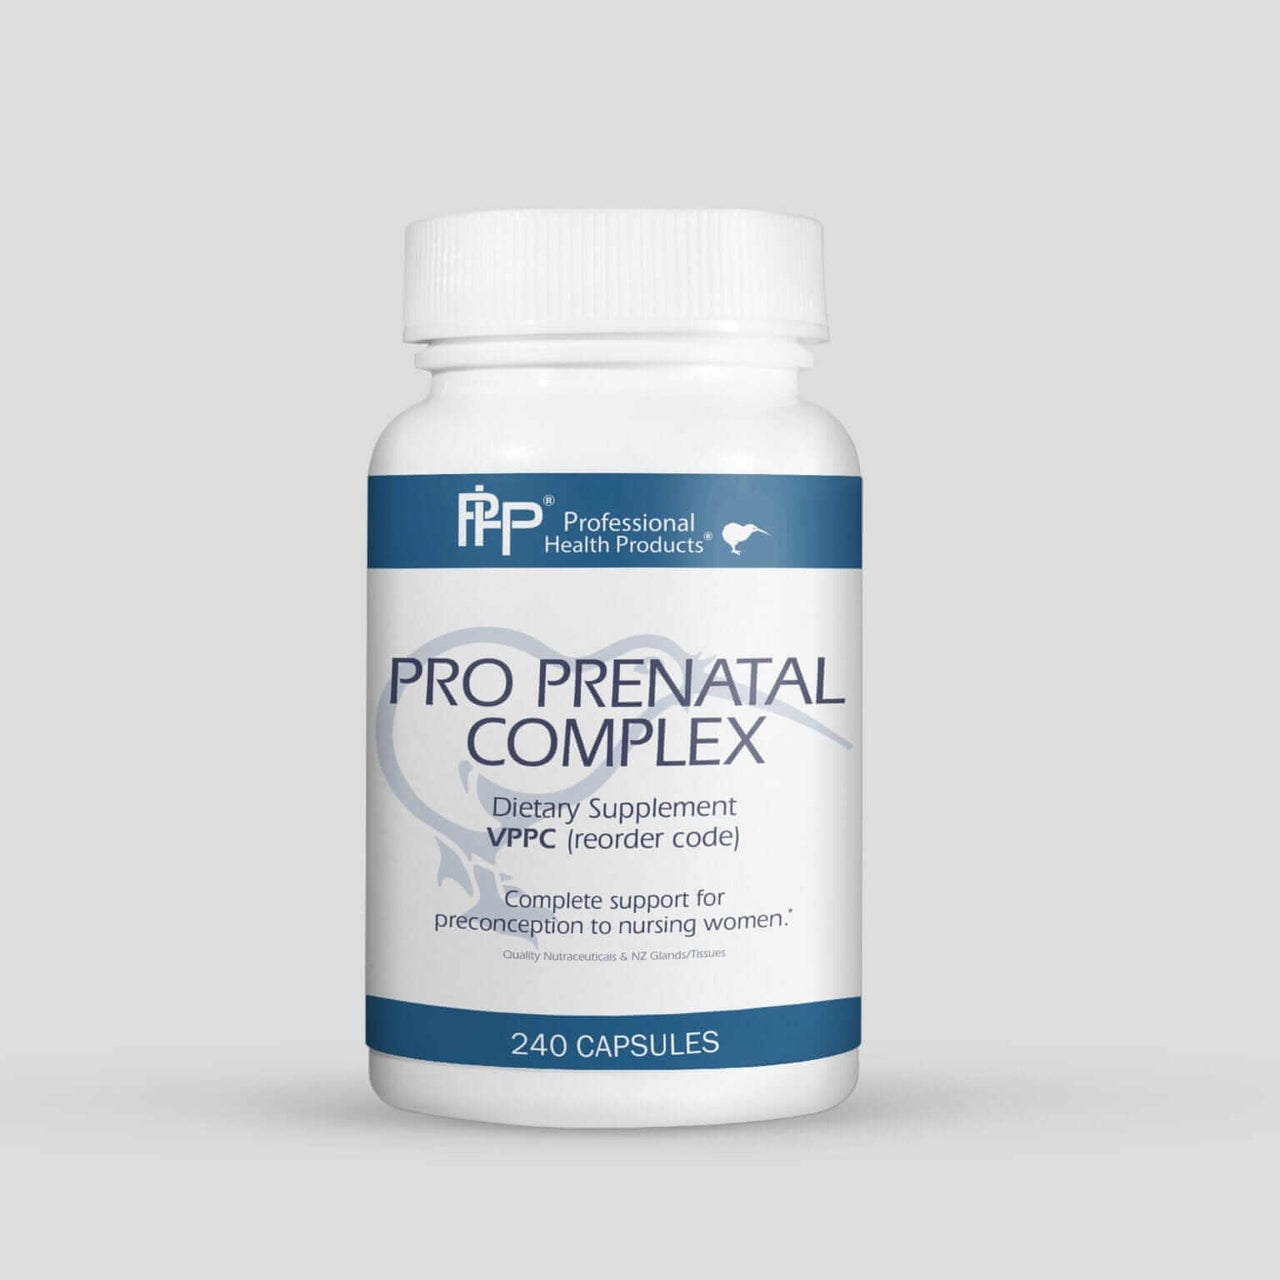 Pro Prenatal Complex * Prof Health Products Supplement - Conners Clinic